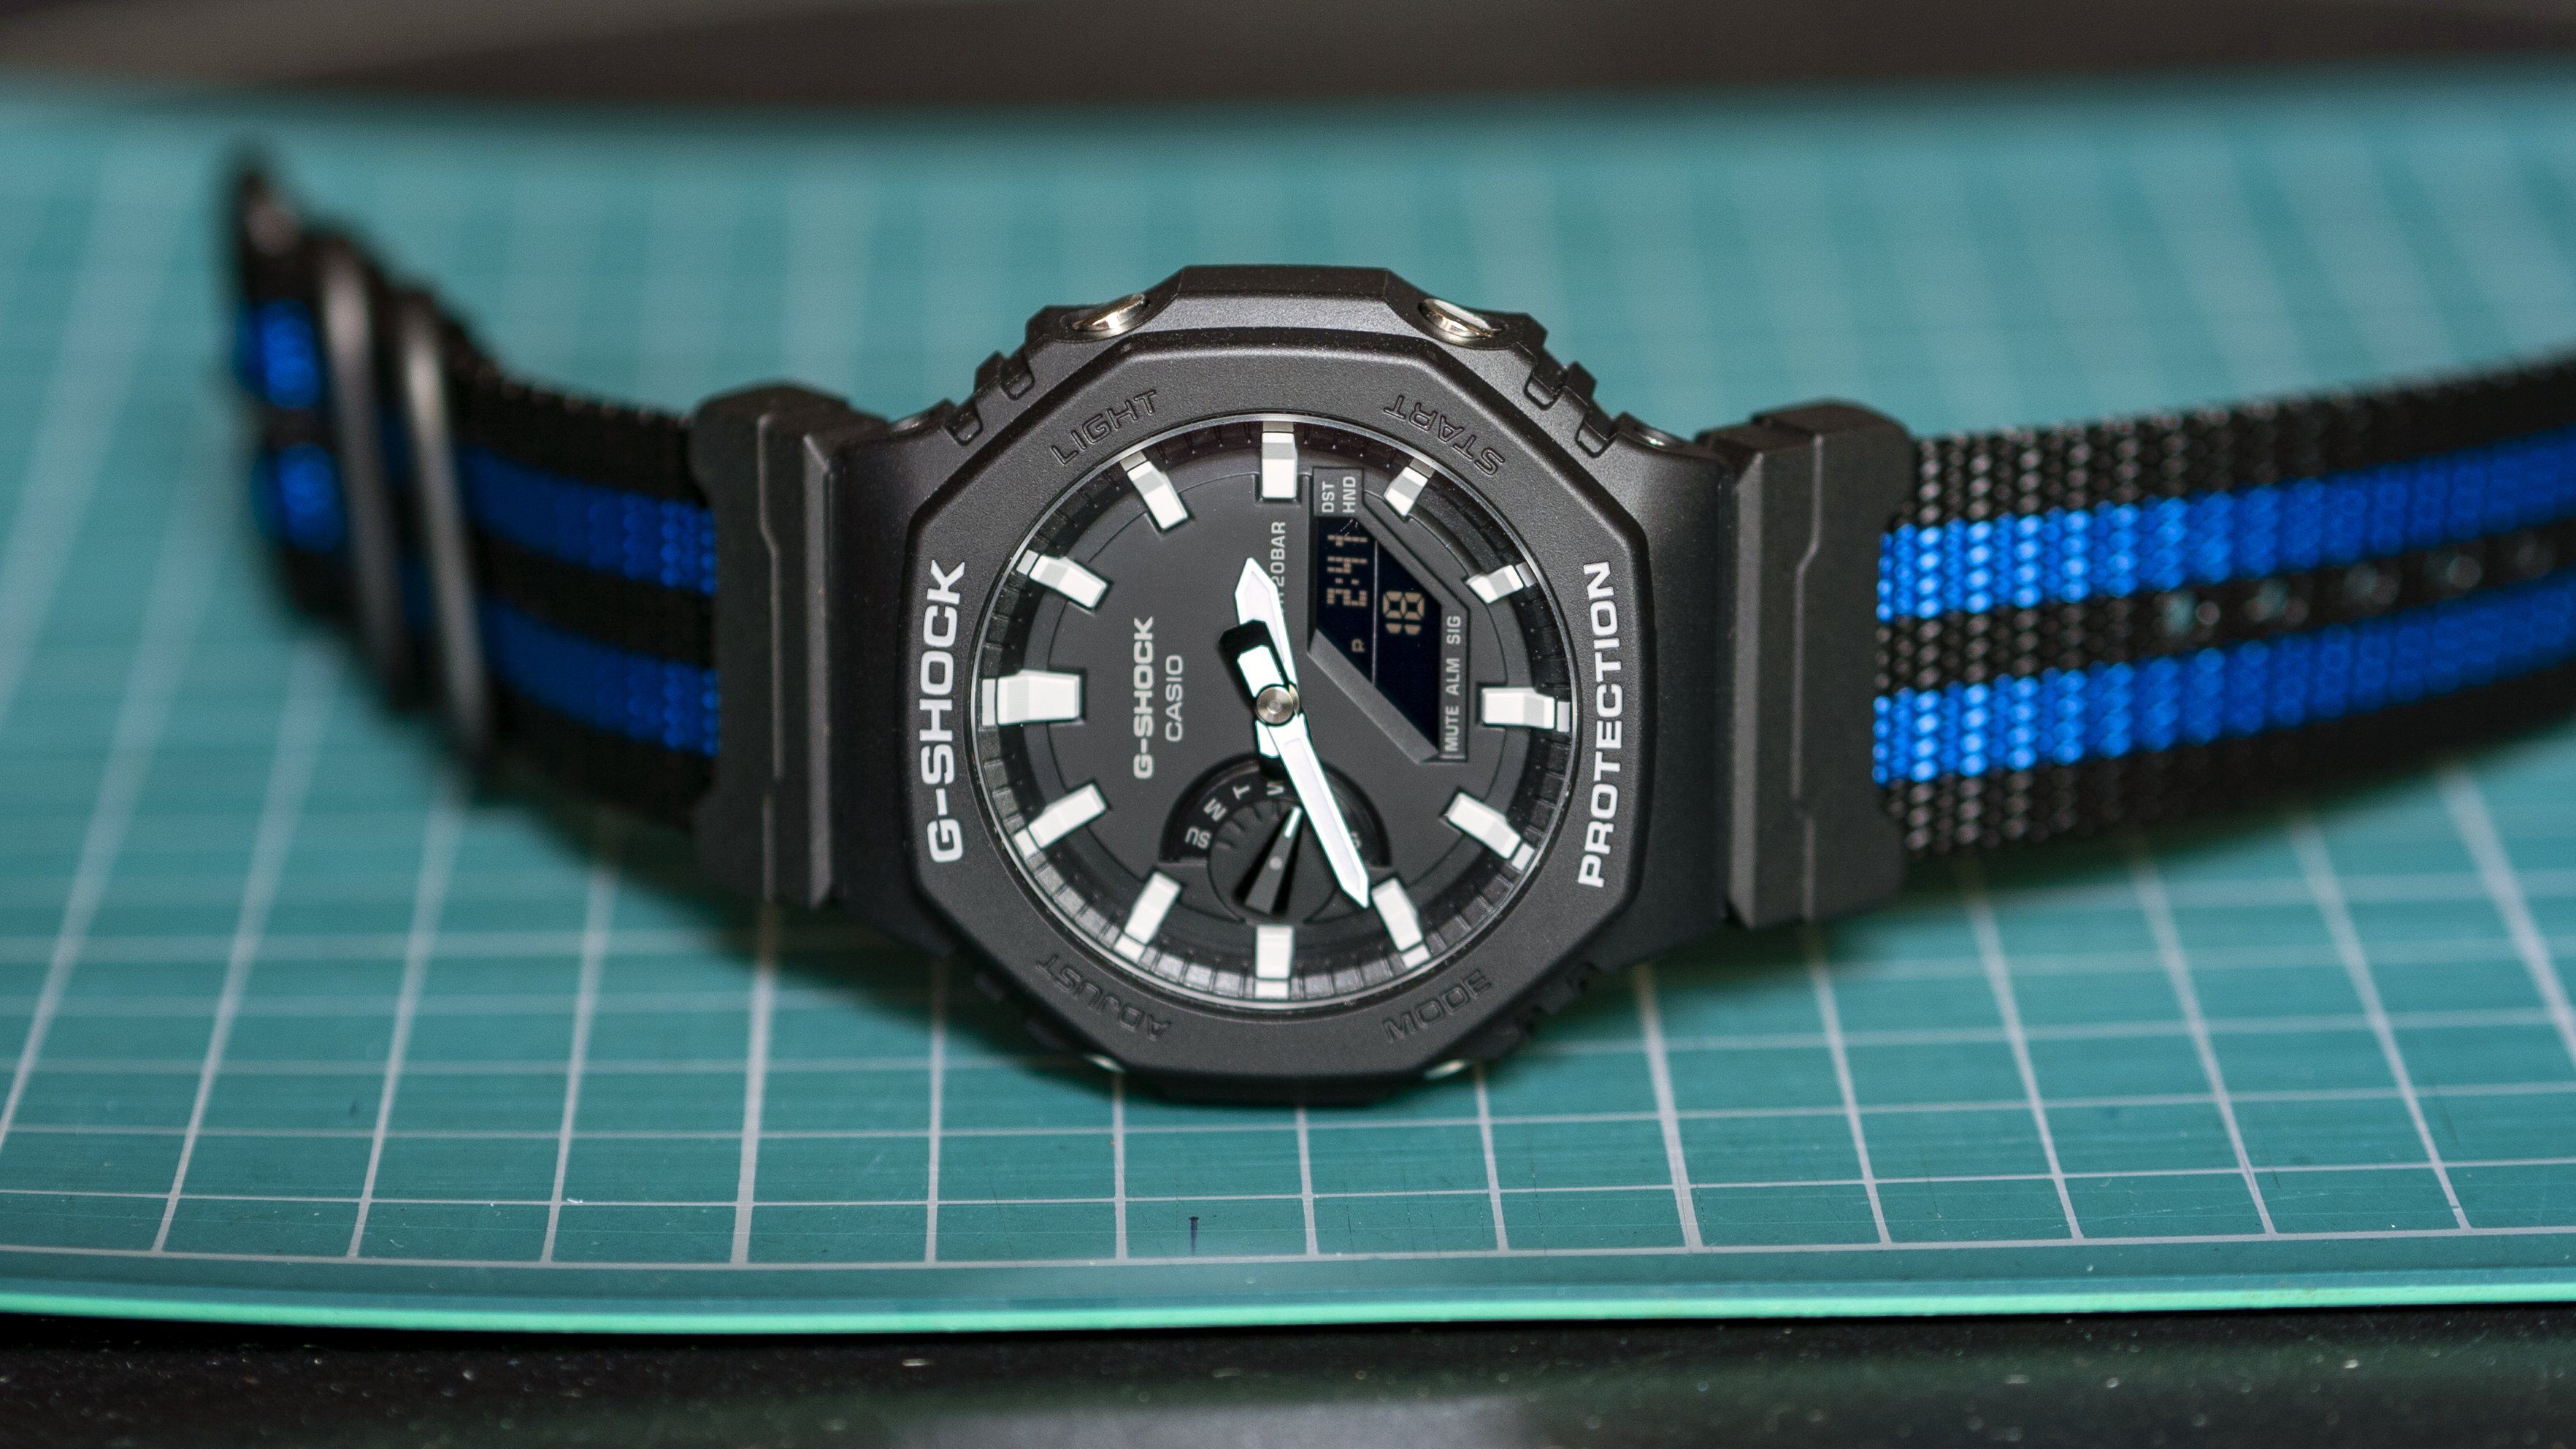 Ballistic Nylon Cobalt Stripe Watch Strap with G-Shock Compatible Adapter and Spring Bar Tool